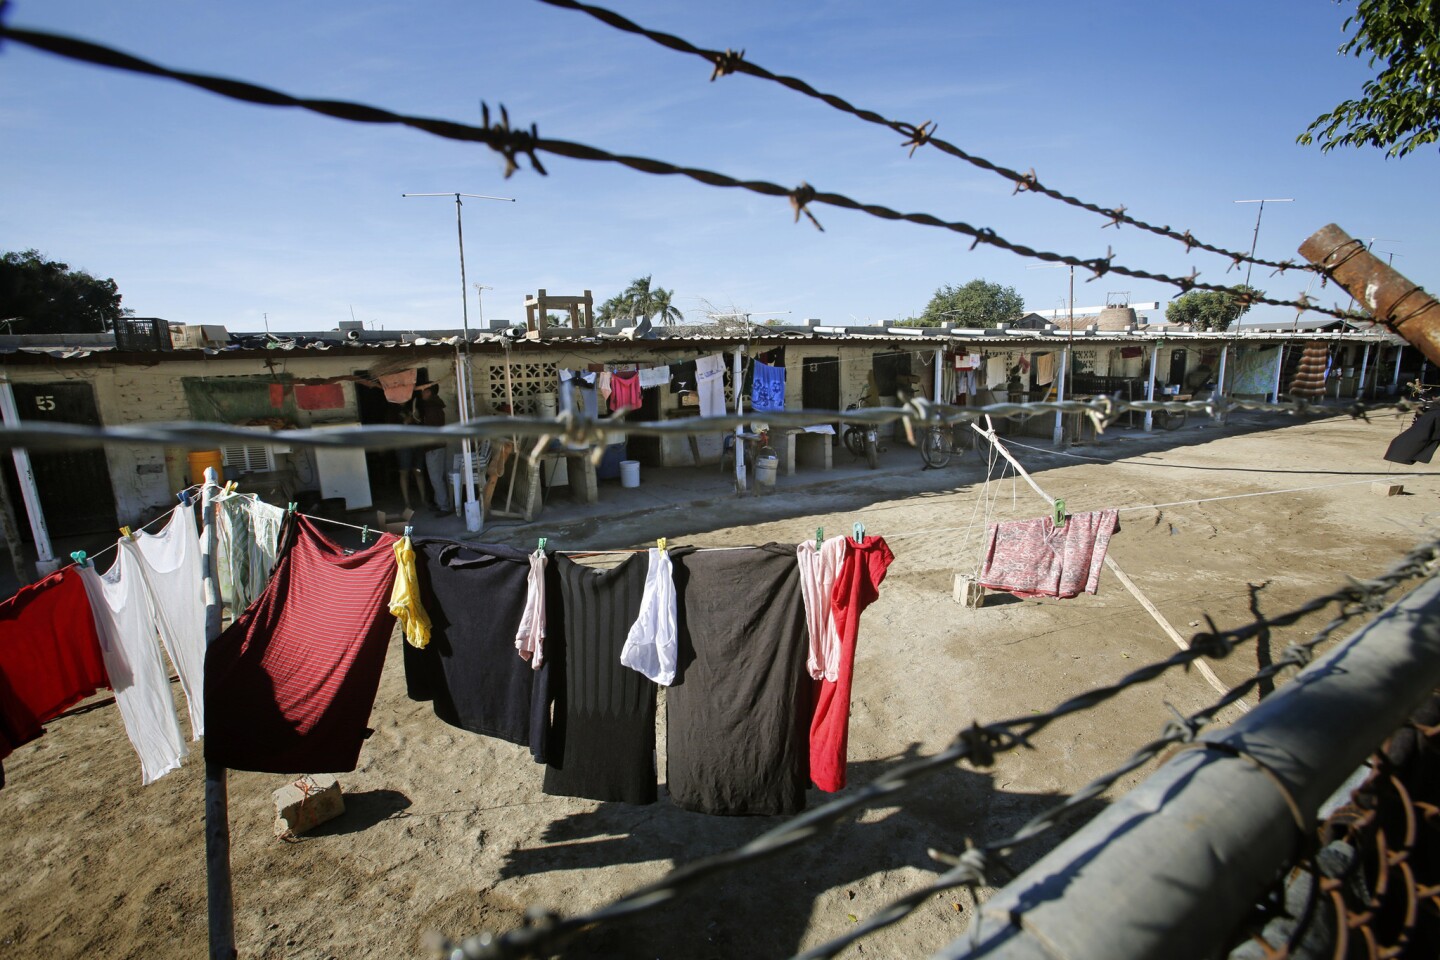 DECEMBER 10, 2013. GUASAVE, SINALOA, MEXICO. At Campo Sacramento in Guasave, Sinaloa, barbed wire runs along the perimeter, and arrivals and departures are controlled around the clock. (Don Bartletti / Los Angeles Times)